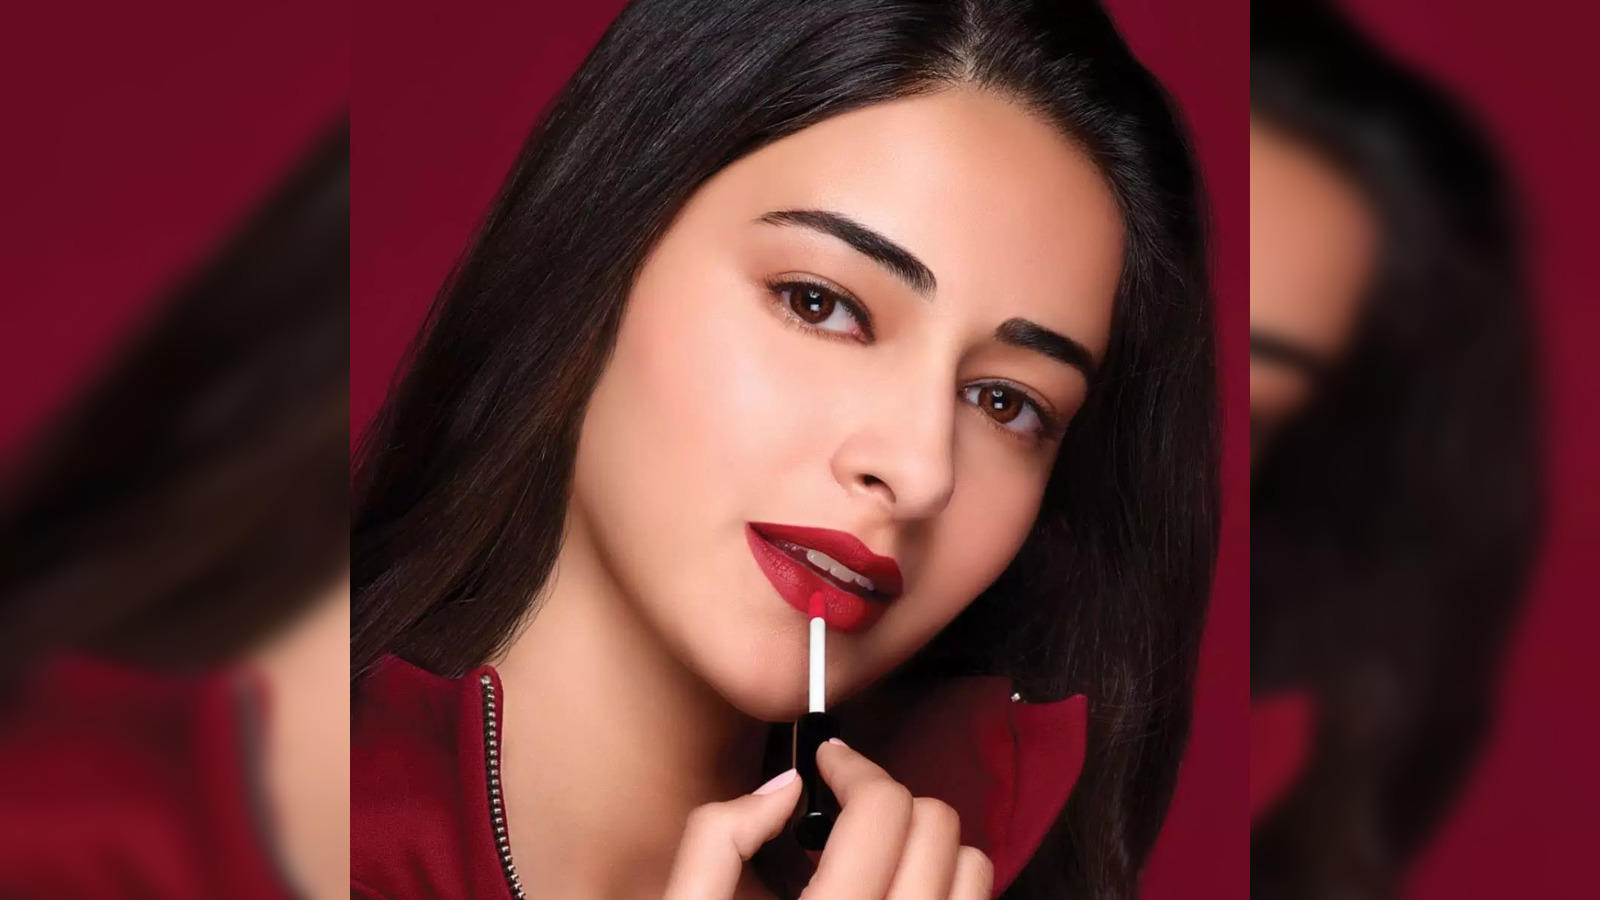 Best Matte Lipsticks: 6 Best Matte Lipsticks for Women in India for an Ultra-Glamorous  Look - The Economic Times